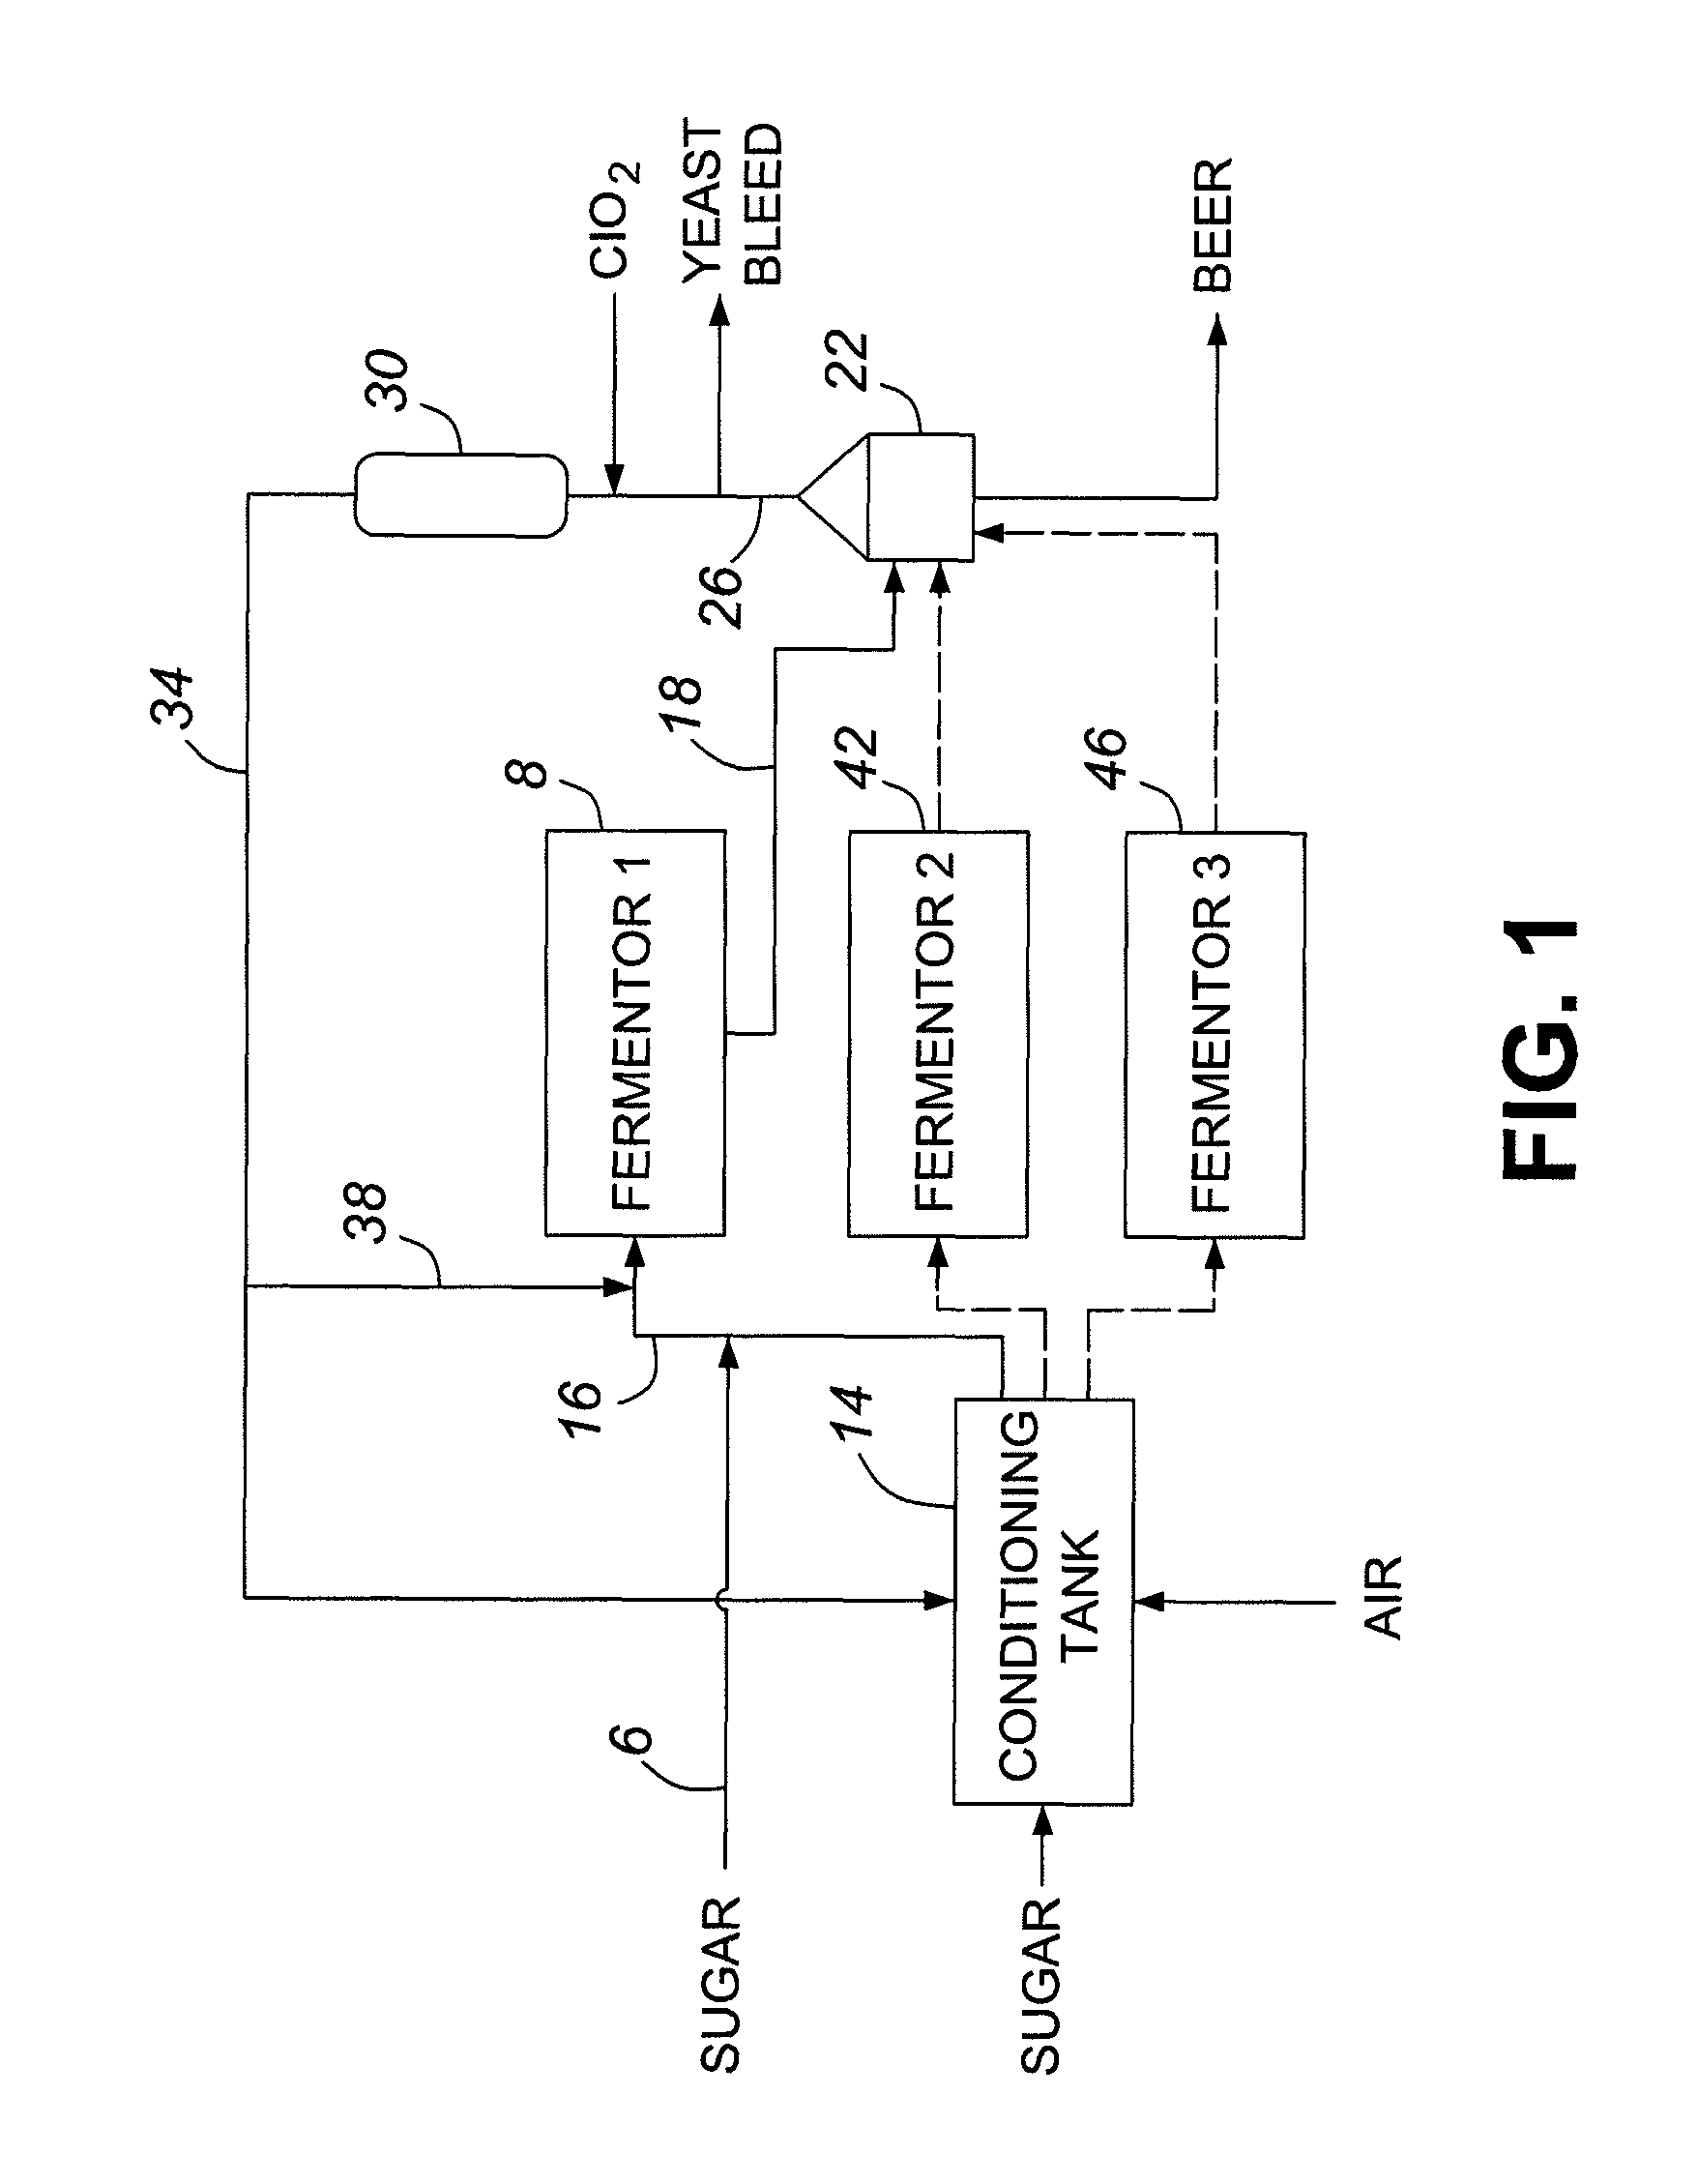 Method for the production of a fermentation product from a pretreated lignocellulosic feedstock